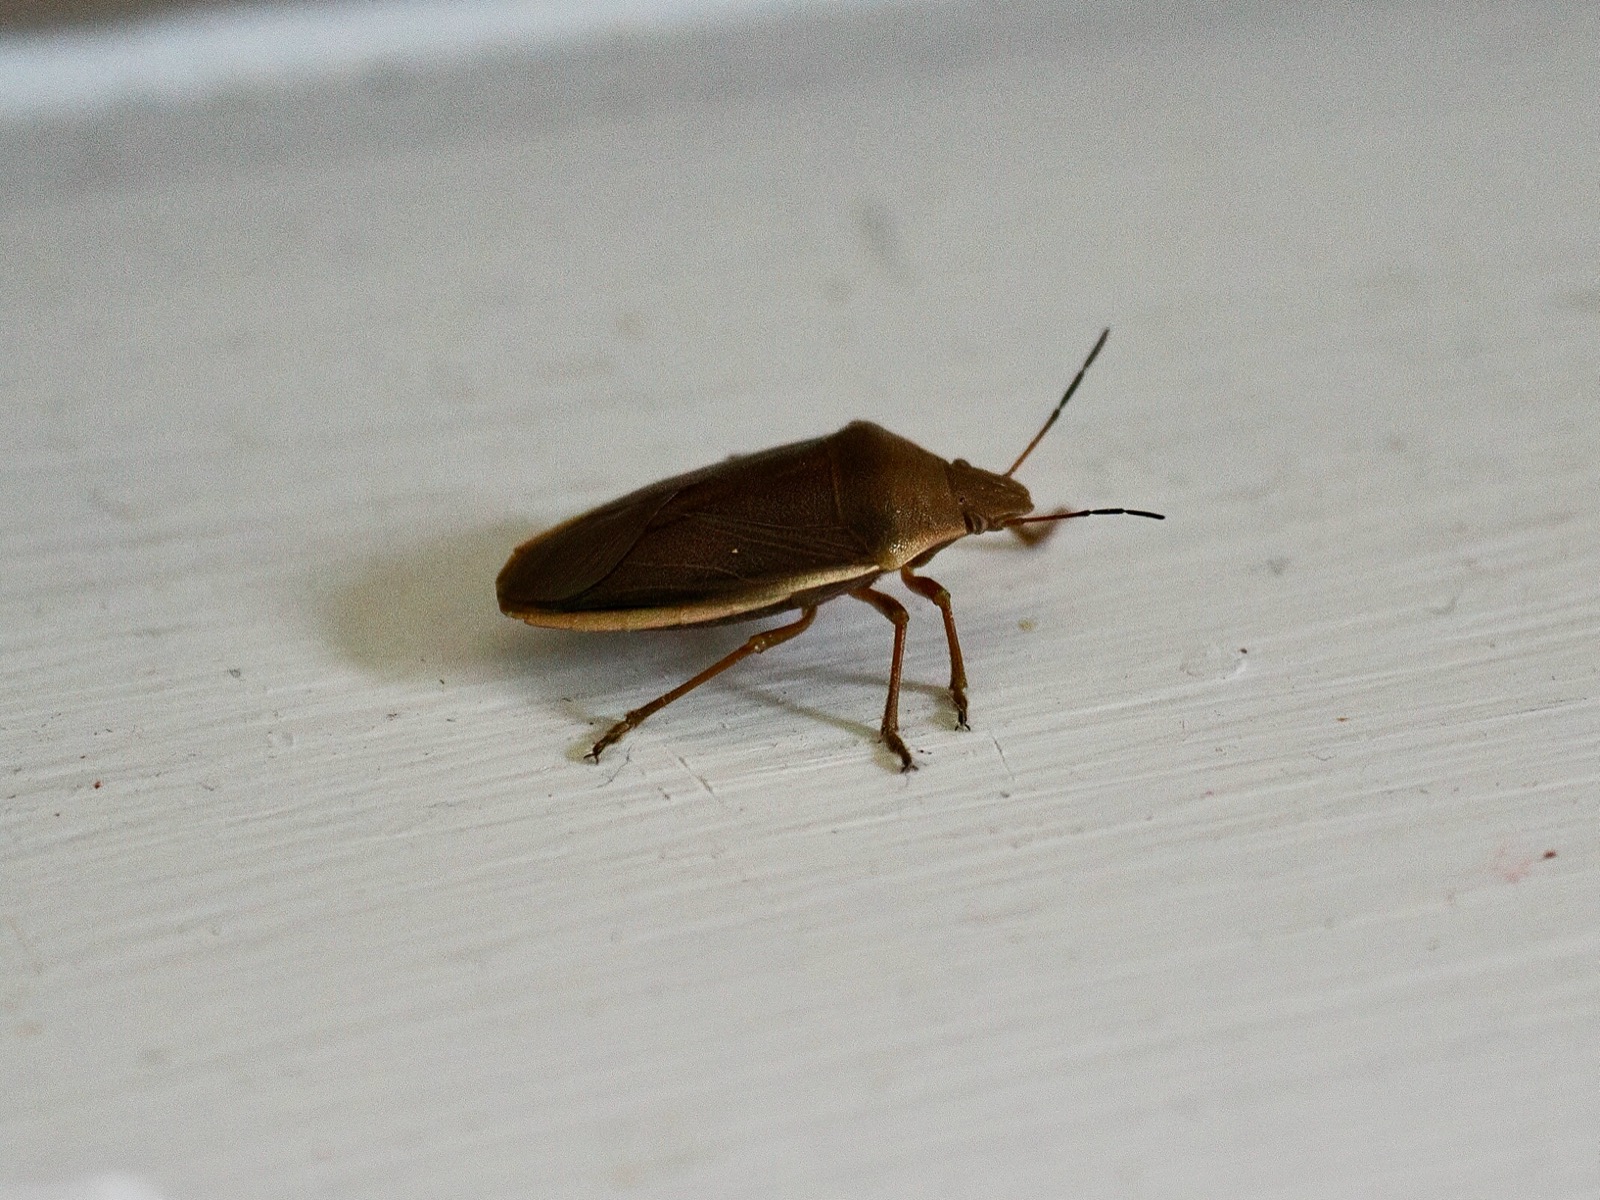 Shield bug that startled me this morning. Not very efficient fliers.